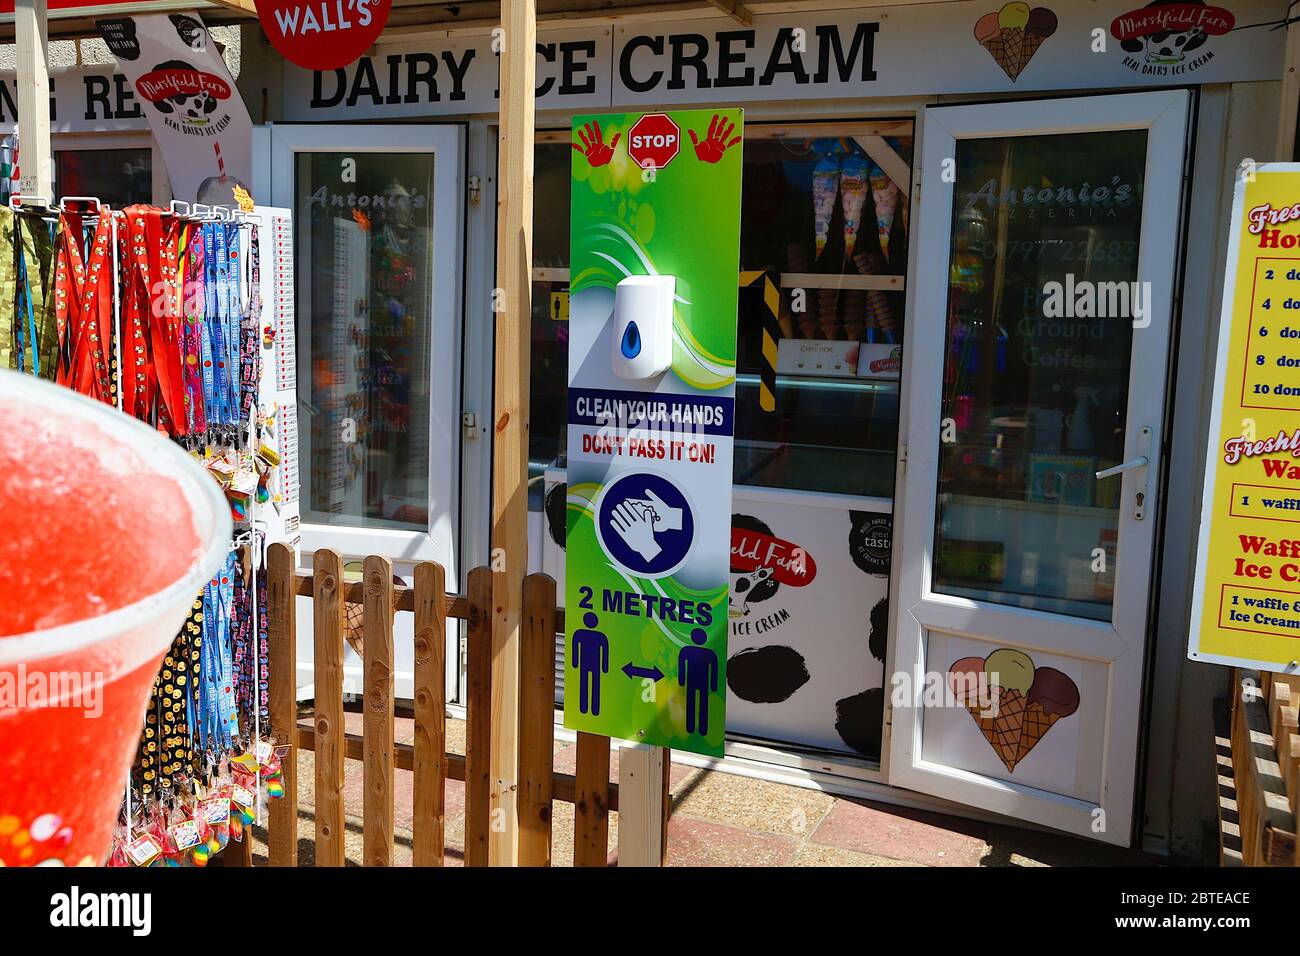 Camber, East Sussex, UK. 25 May, 2020. UK Weather: With government easing lockdown, scores of people arrive in cars and fill the car park almost immediately at Camber Sands, East Sussex. A wash station and social distancing signs outside a local ice cream parlour. Photo Credit: Paul Lawrenson/Alamy Live News Stock Photo